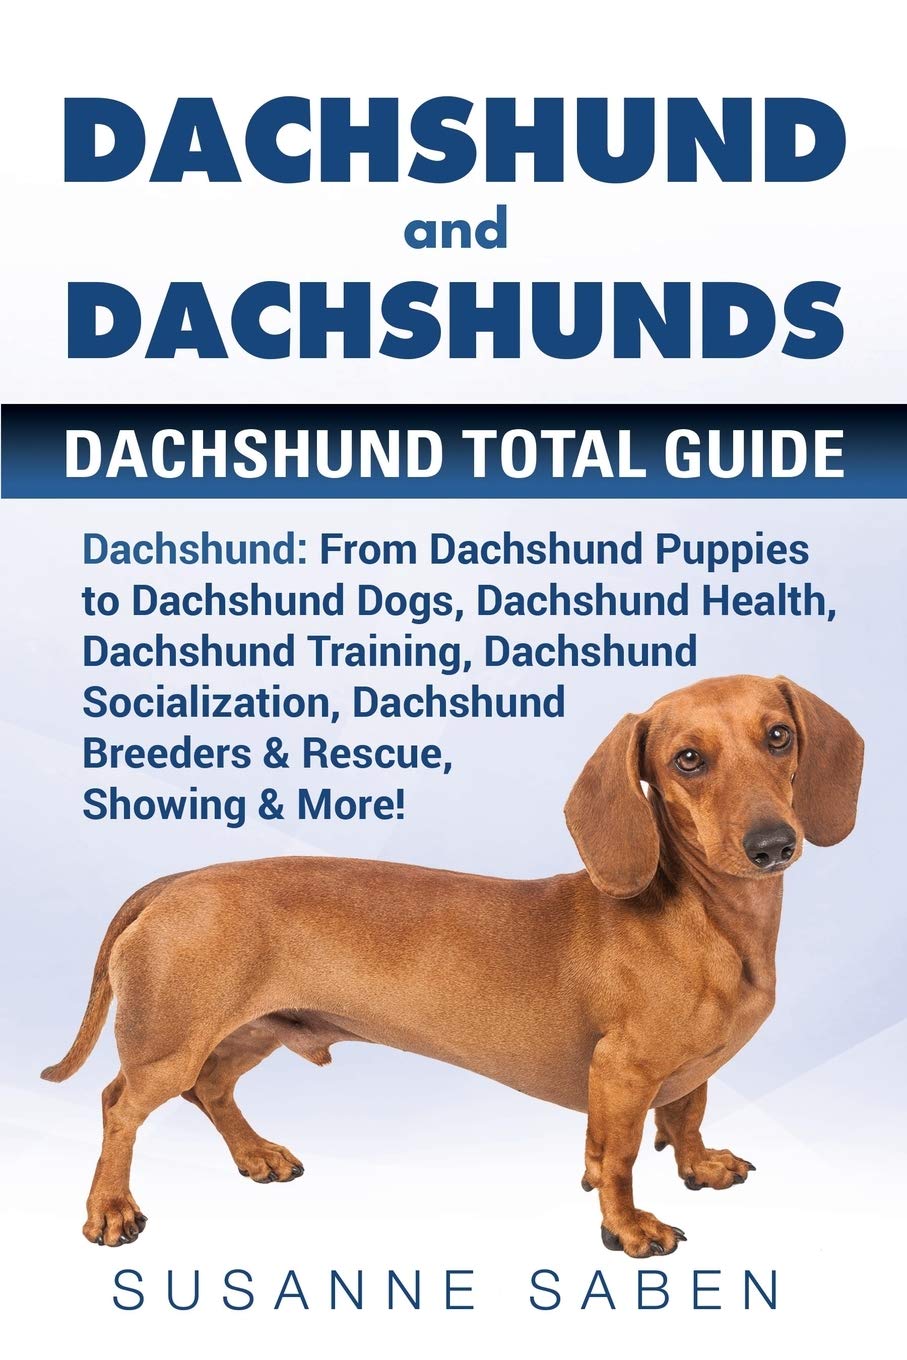 Detail Picture Of Daschunds Nomer 30